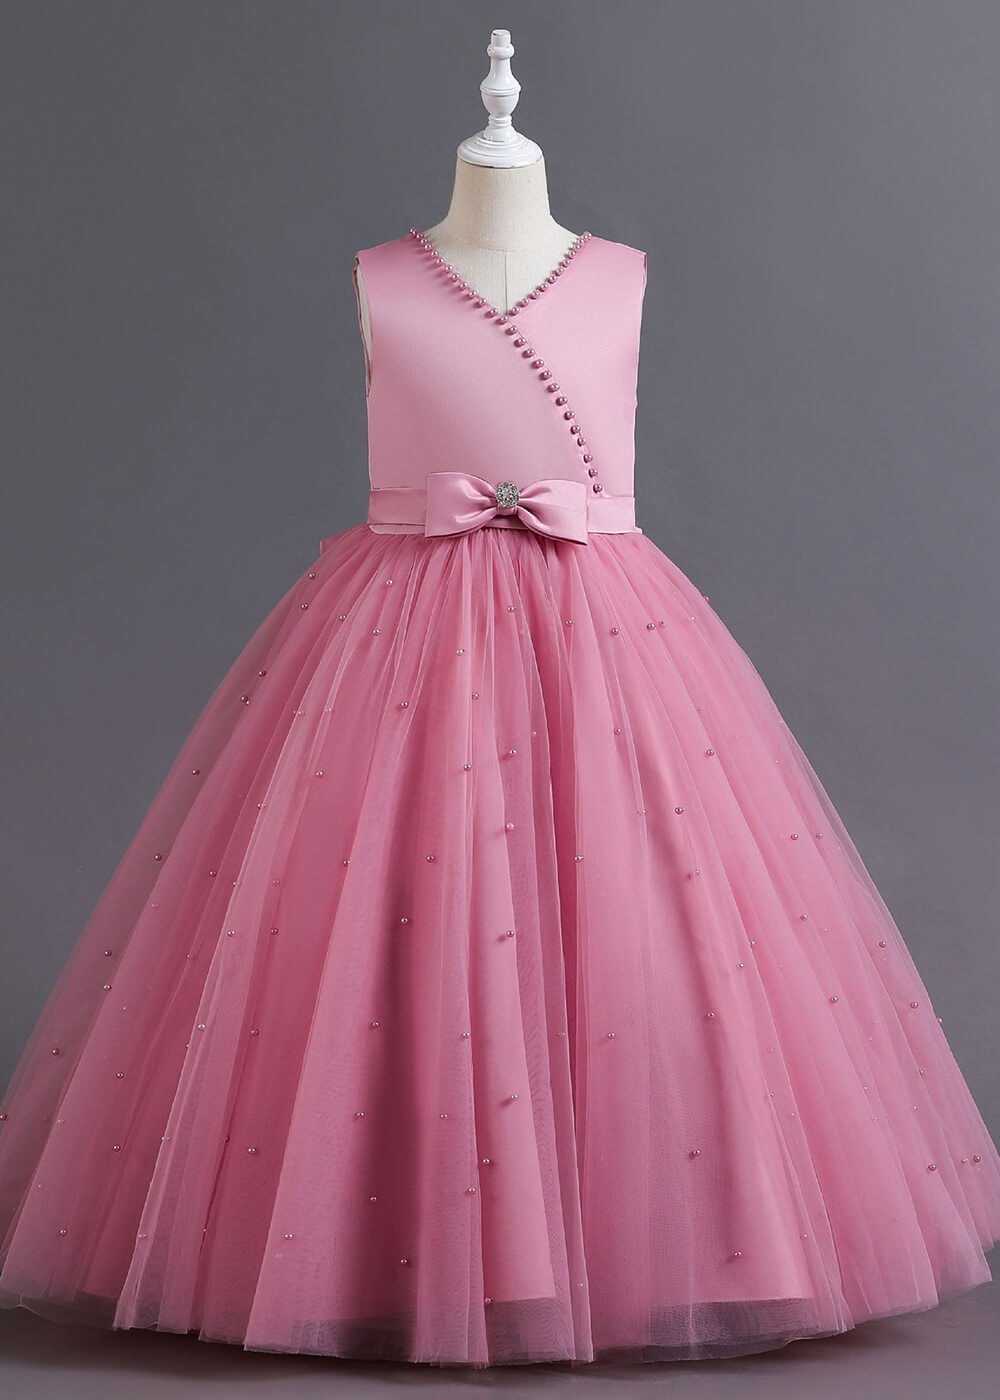 V-neck Tulle and Satin A-line Pearl Applicated Flower Girl Dress with Bow